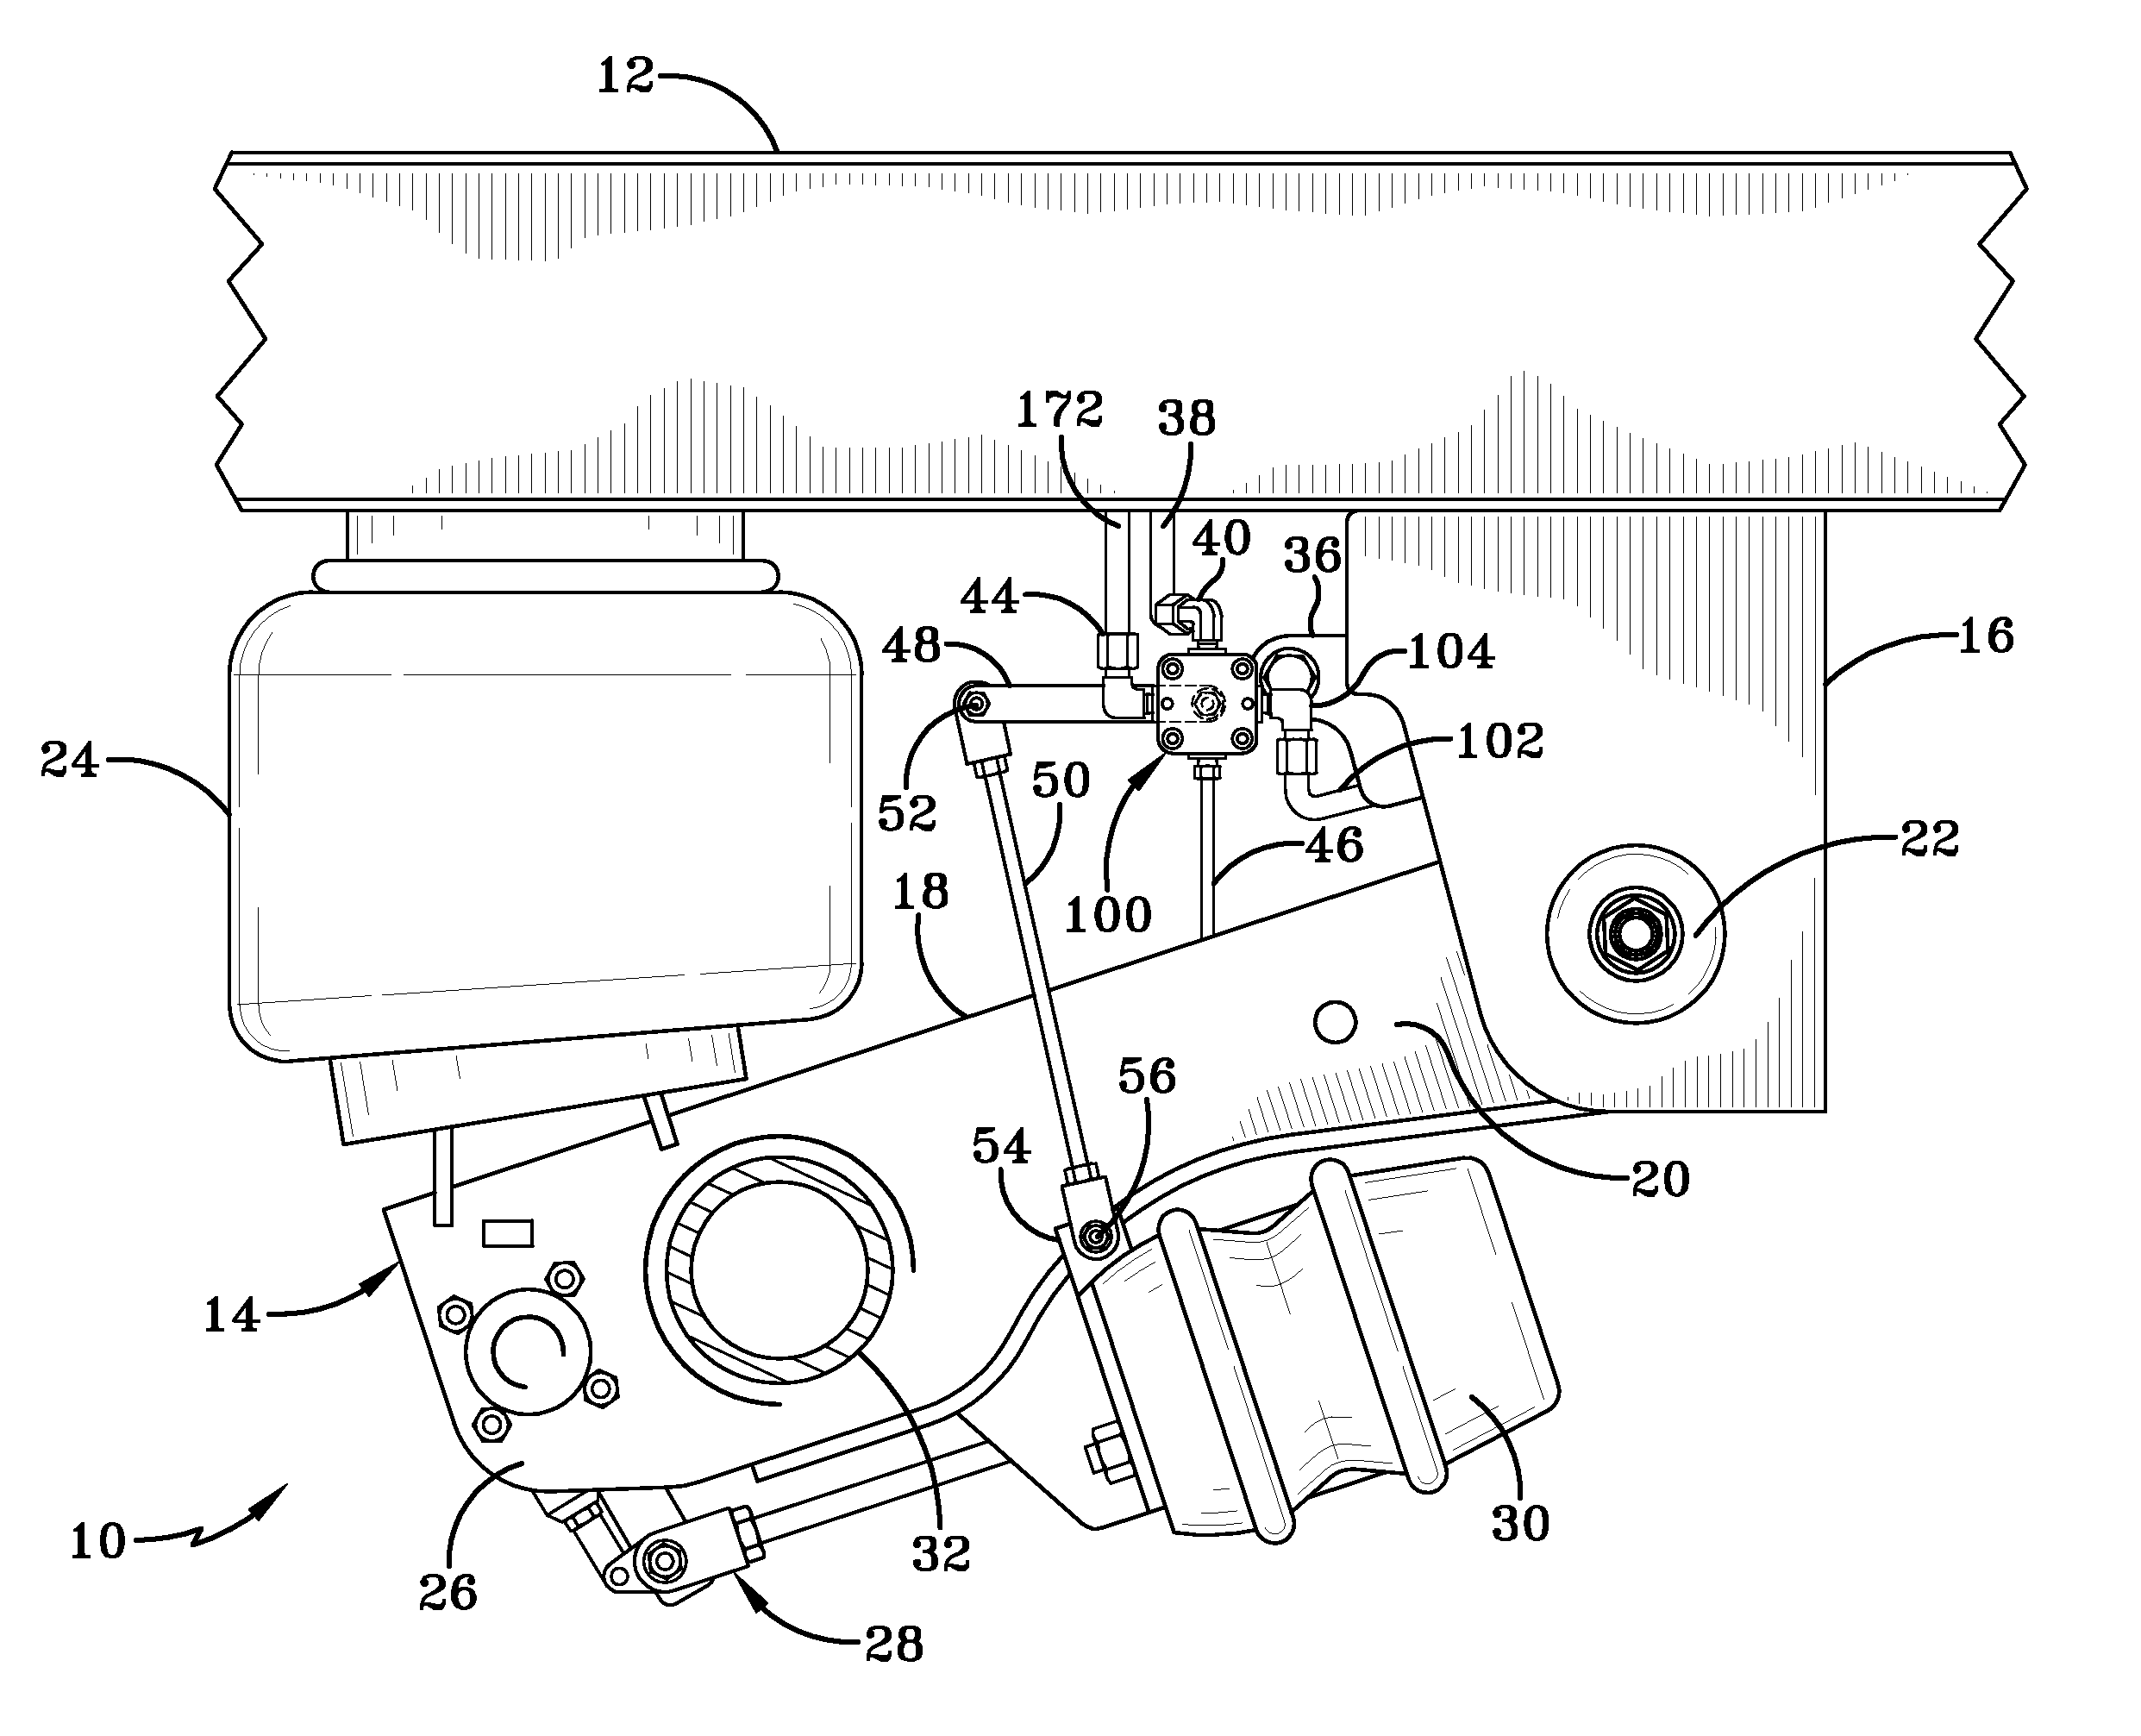 Multi-stage height control valve including position sensitive pilot signal and pressure boost for vehicle air springs